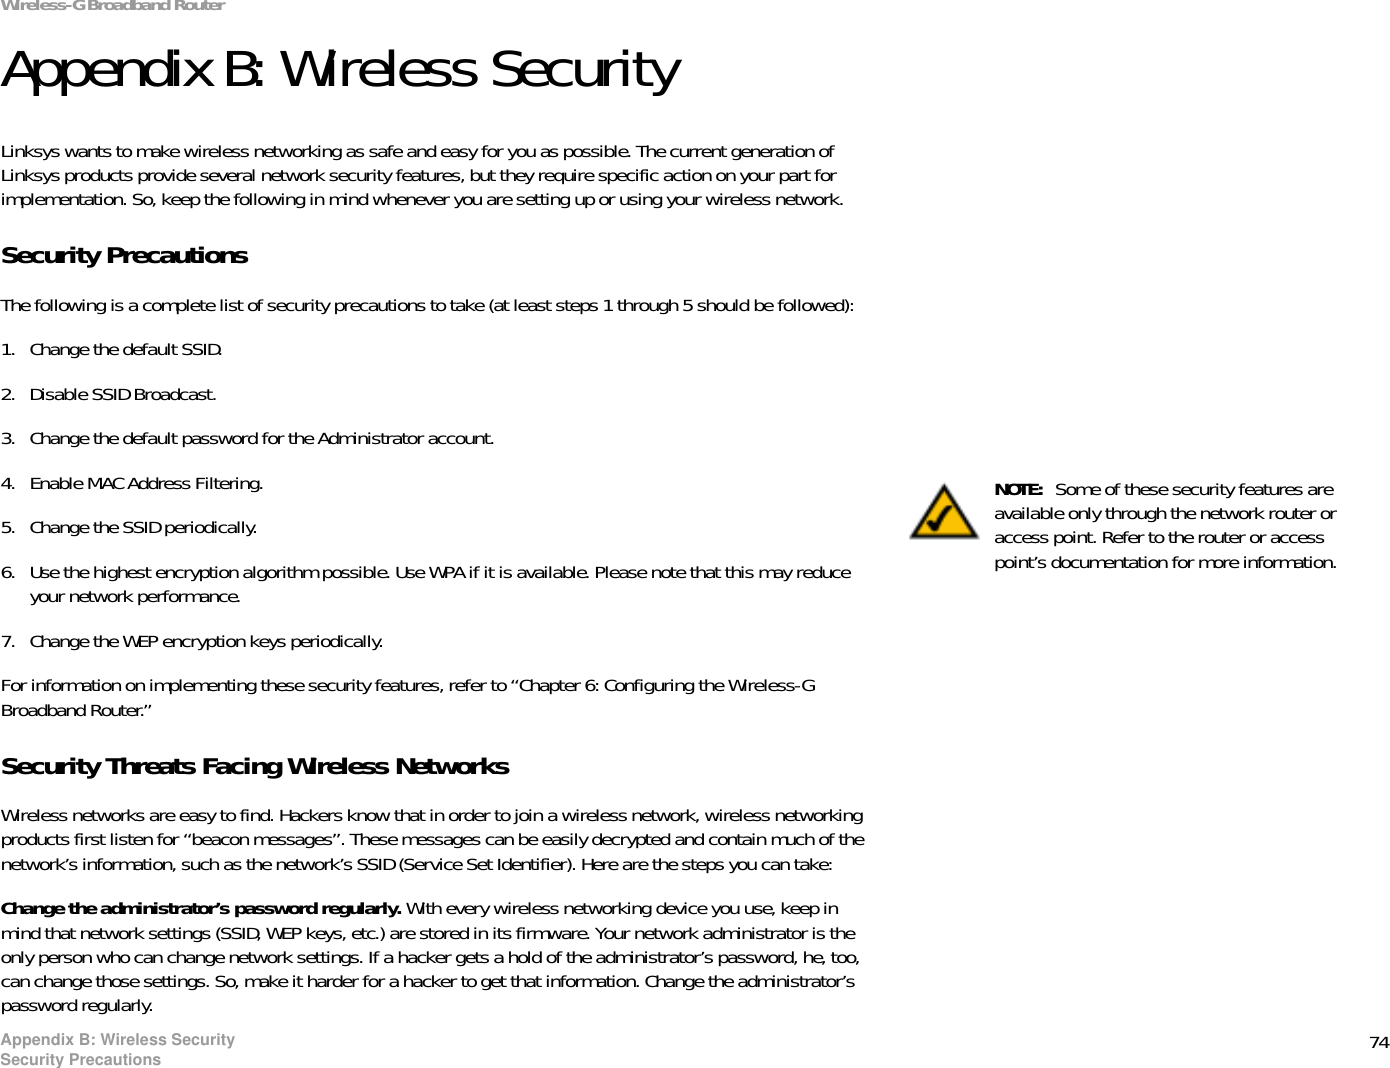 74Appendix B: Wireless SecuritySecurity PrecautionsWireless-G Broadband RouterAppendix B: Wireless SecurityLinksys wants to make wireless networking as safe and easy for you as possible. The current generation of Linksys products provide several network security features, but they require specific action on your part for implementation. So, keep the following in mind whenever you are setting up or using your wireless network.Security PrecautionsThe following is a complete list of security precautions to take (at least steps 1 through 5 should be followed):1. Change the default SSID. 2. Disable SSID Broadcast. 3. Change the default password for the Administrator account. 4. Enable MAC Address Filtering. 5. Change the SSID periodically. 6. Use the highest encryption algorithm possible. Use WPA if it is available. Please note that this may reduce your network performance. 7. Change the WEP encryption keys periodically. For information on implementing these security features, refer to “Chapter 6: Configuring the Wireless-G Broadband Router.”Security Threats Facing Wireless Networks Wireless networks are easy to find. Hackers know that in order to join a wireless network, wireless networking products first listen for “beacon messages”. These messages can be easily decrypted and contain much of the network’s information, such as the network’s SSID (Service Set Identifier). Here are the steps you can take:Change the administrator’s password regularly. With every wireless networking device you use, keep in mind that network settings (SSID, WEP keys, etc.) are stored in its firmware. Your network administrator is the only person who can change network settings. If a hacker gets a hold of the administrator’s password, he, too, can change those settings. So, make it harder for a hacker to get that information. Change the administrator’s password regularly.NOTE:  Some of these security features are available only through the network router or access point. Refer to the router or access point’s documentation for more information.